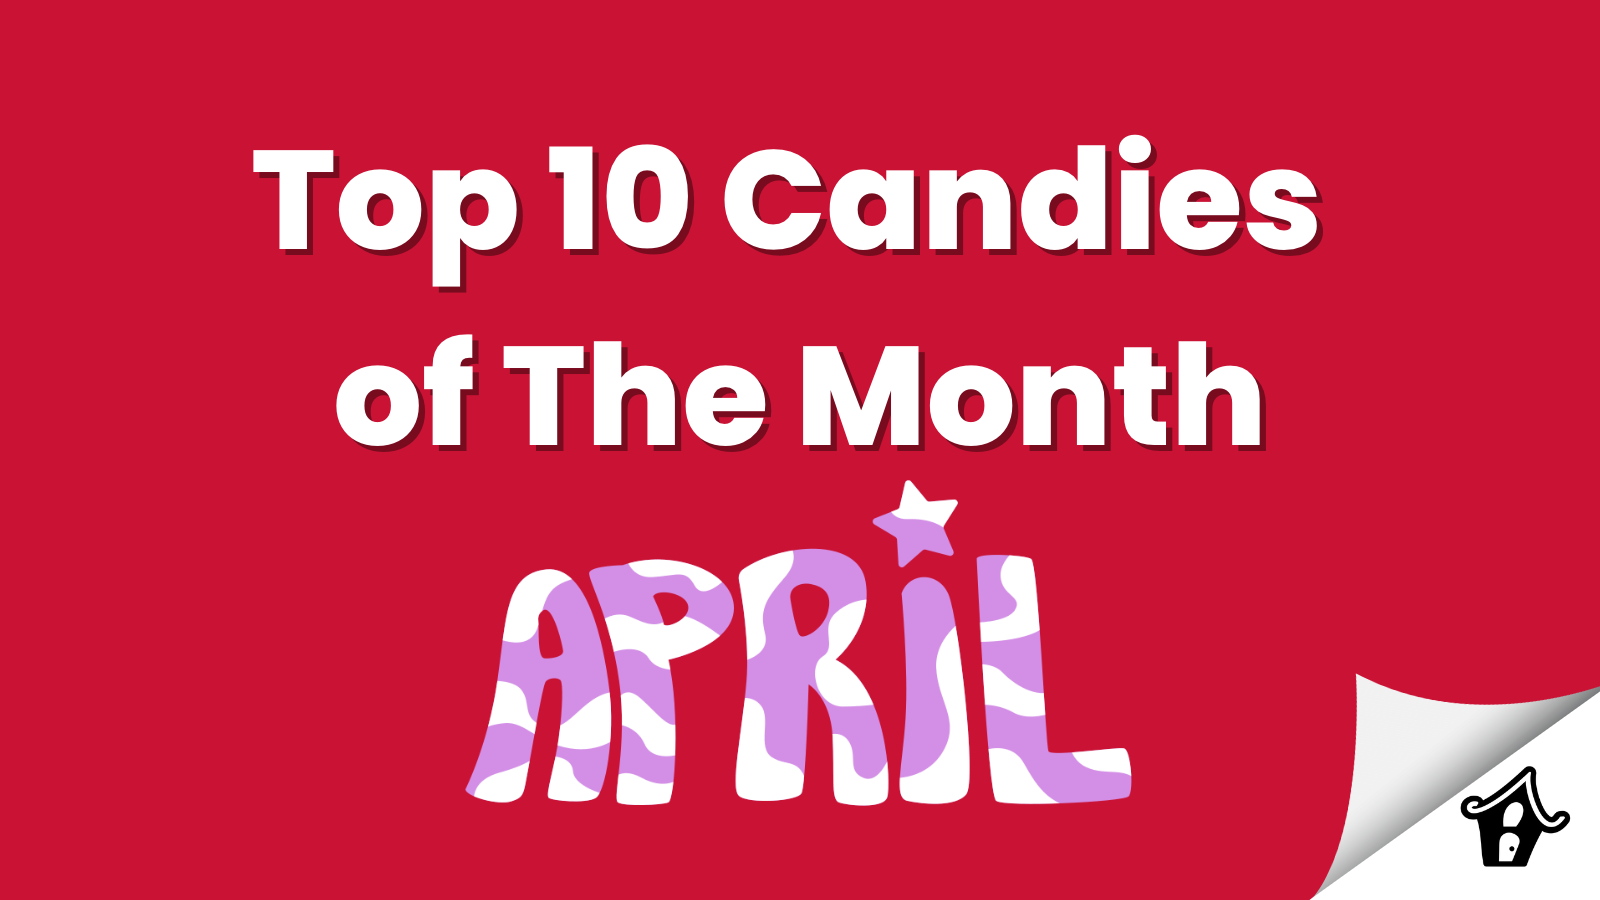 Top 10 Candies of The Month - April, Types of Candy, Canadian Candy, Candies, Best Chocolate Bars, Canadian Sweets